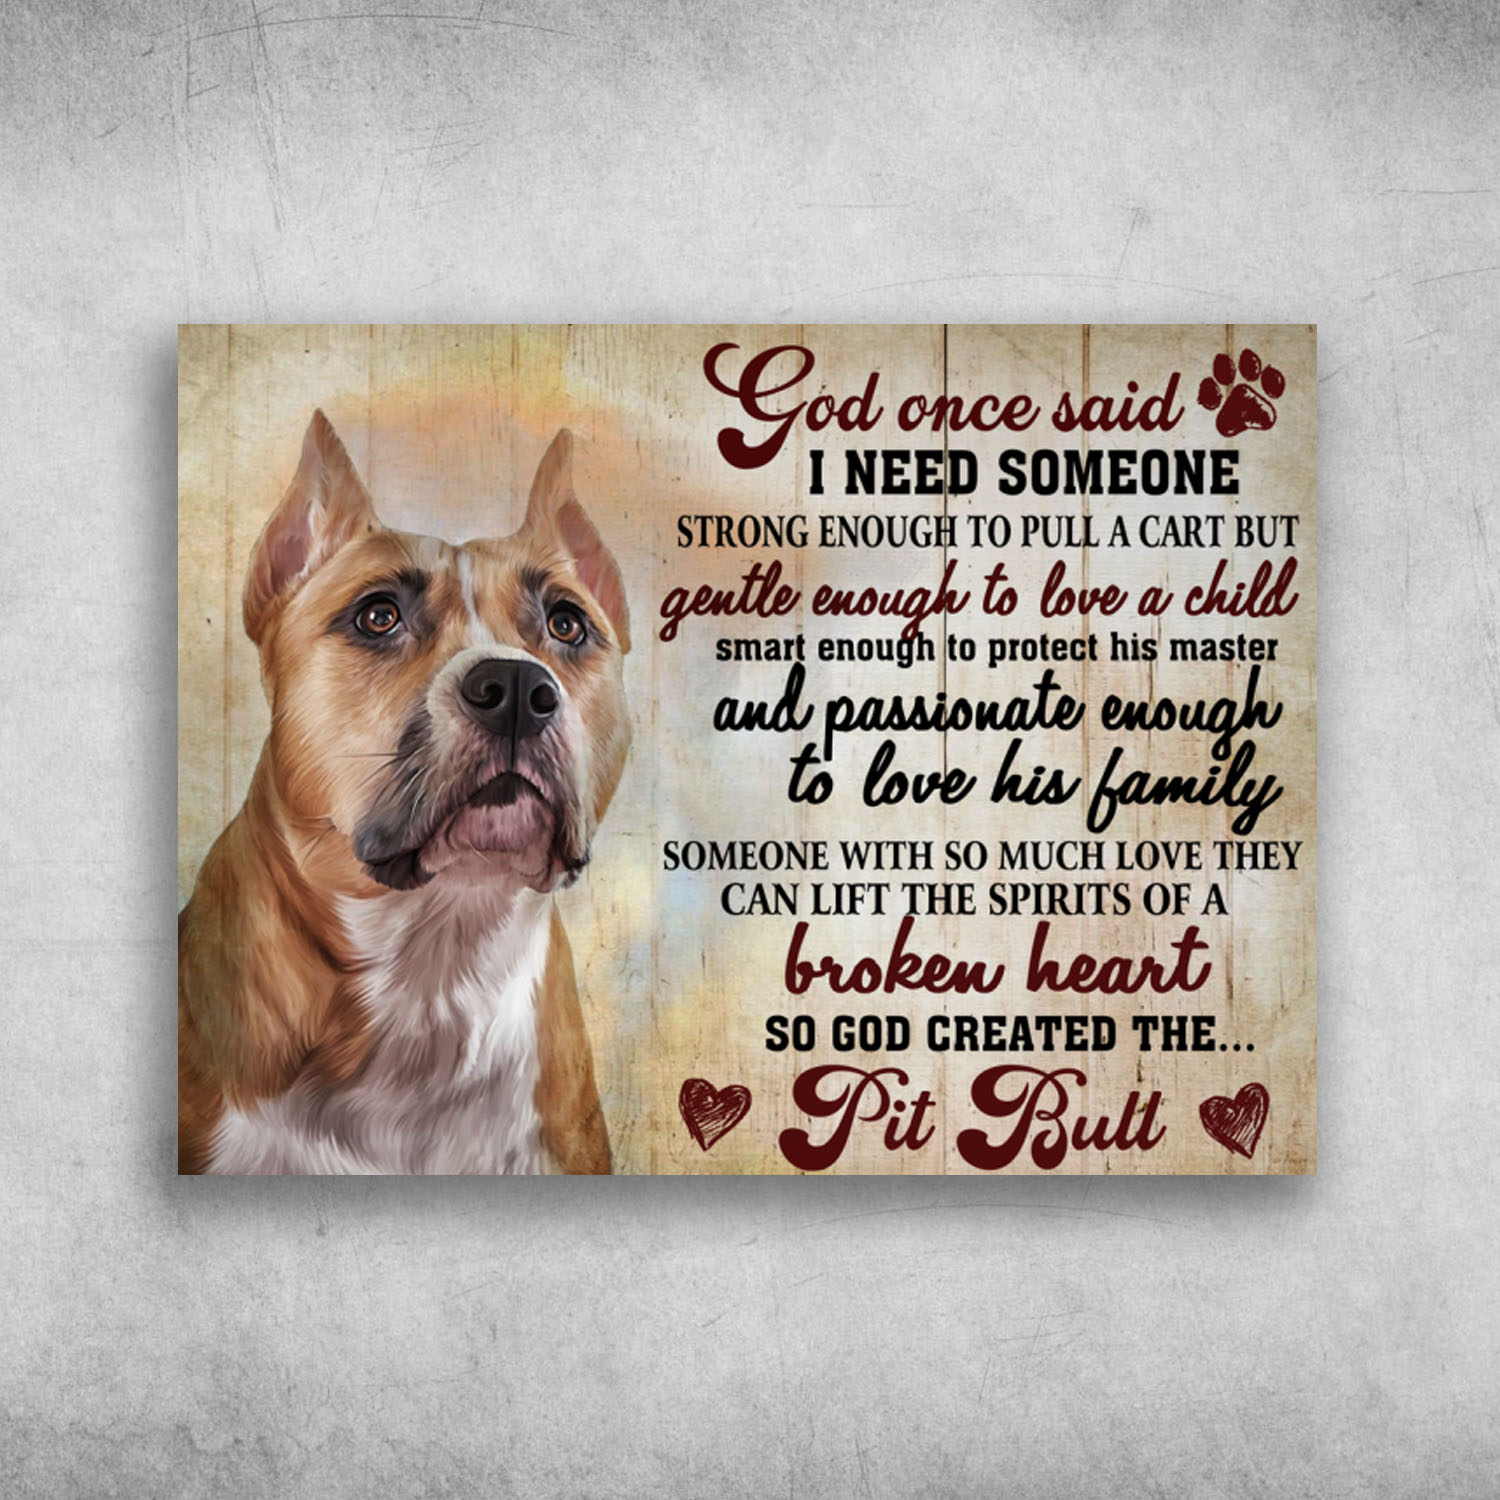 The Spirits Of A Broken Heart So God Created The Pit Bull